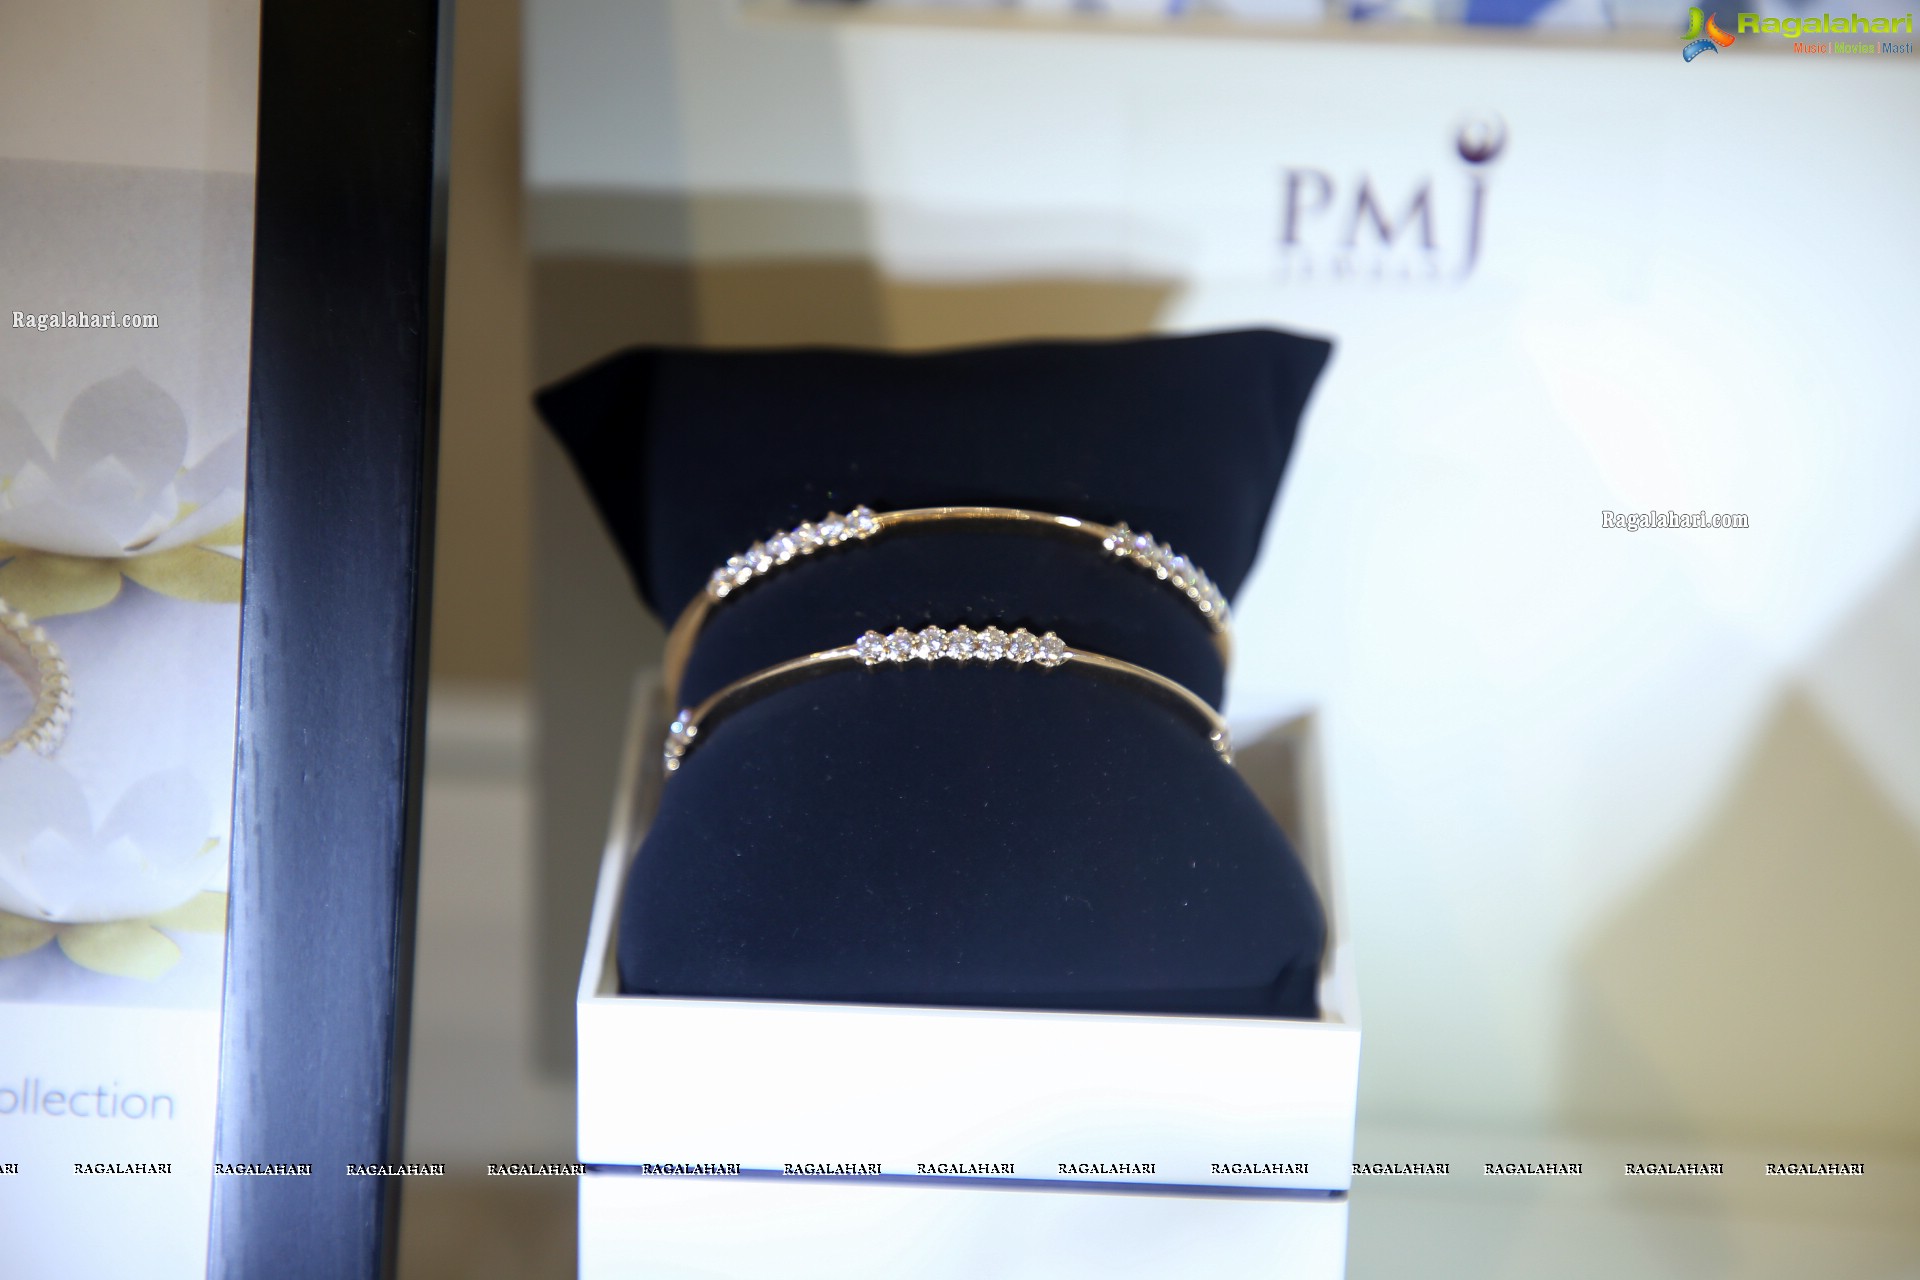 PMJ Jewels Launches The Exclusive Forevermark Circle of Trust Collection in Hyderabad